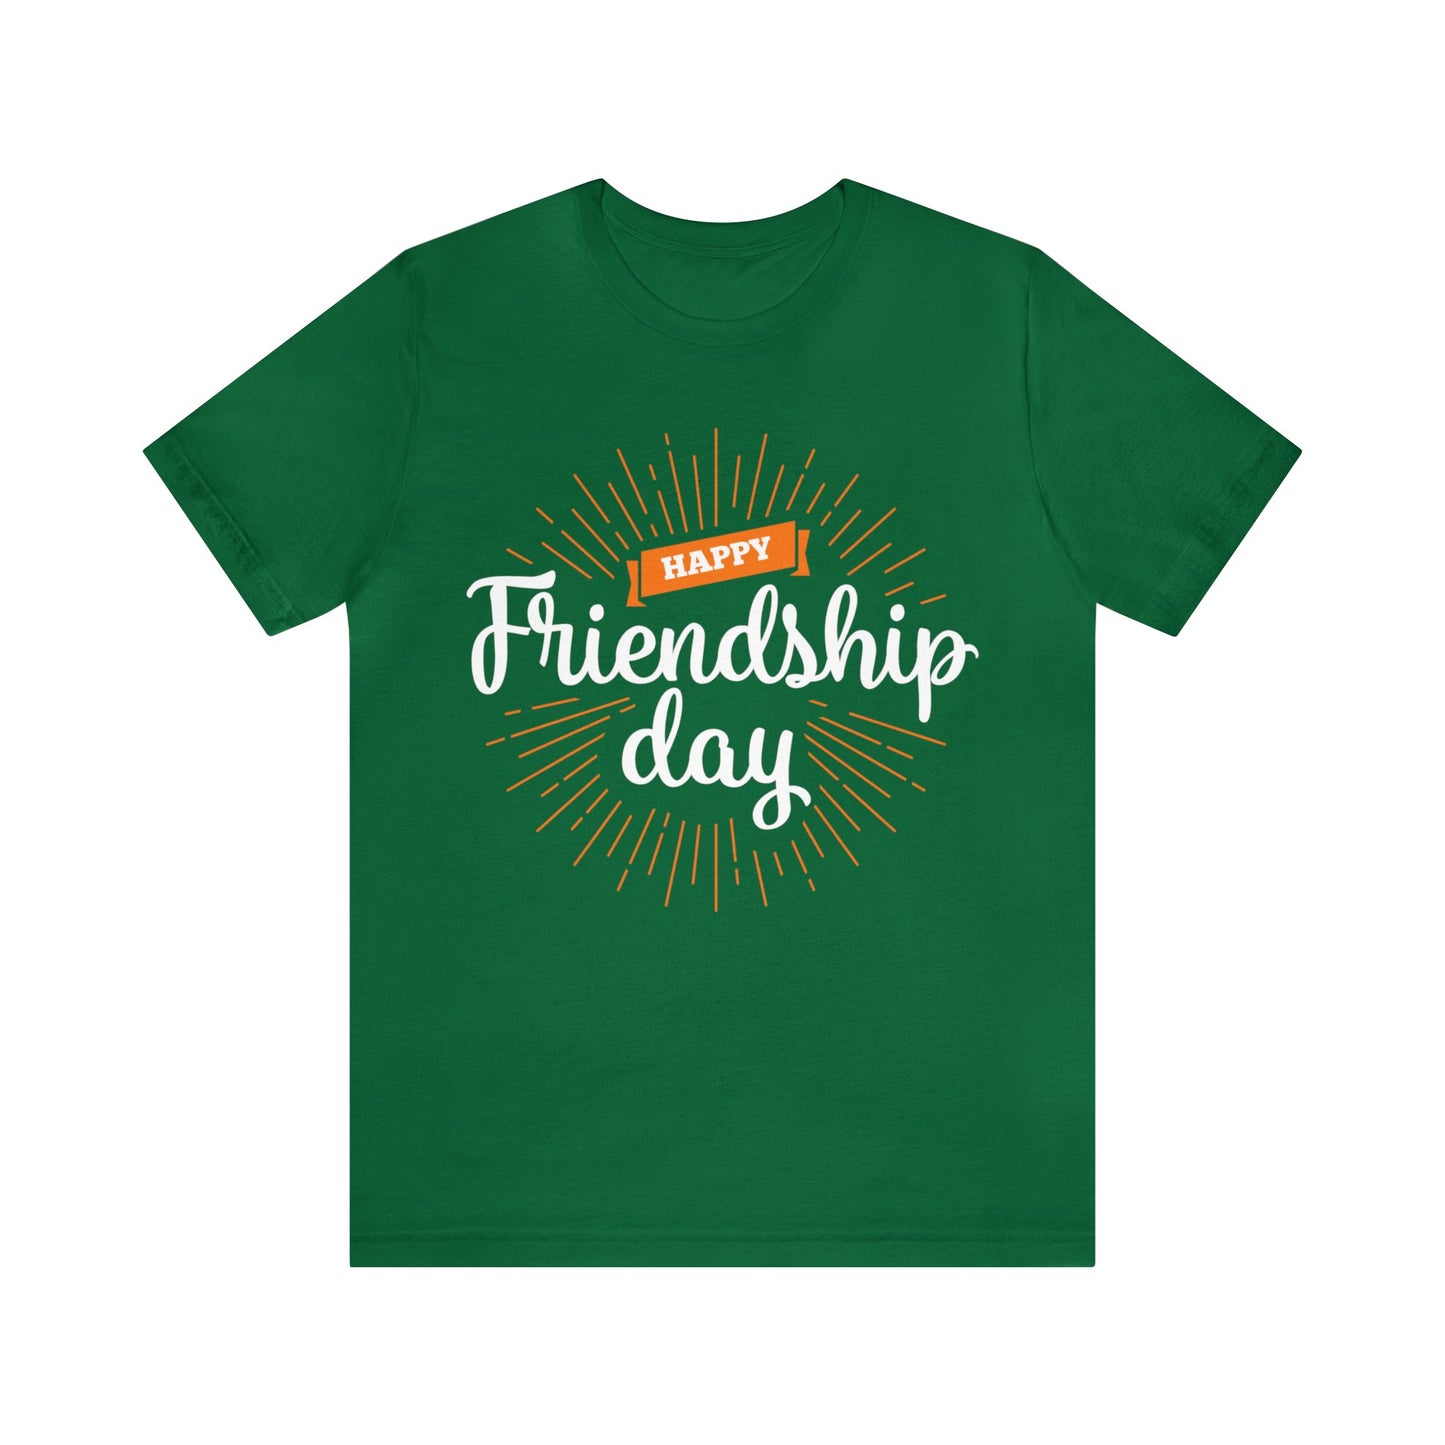 Celebrate Happy Friendship Day with our Exclusive T-shirt Collection!